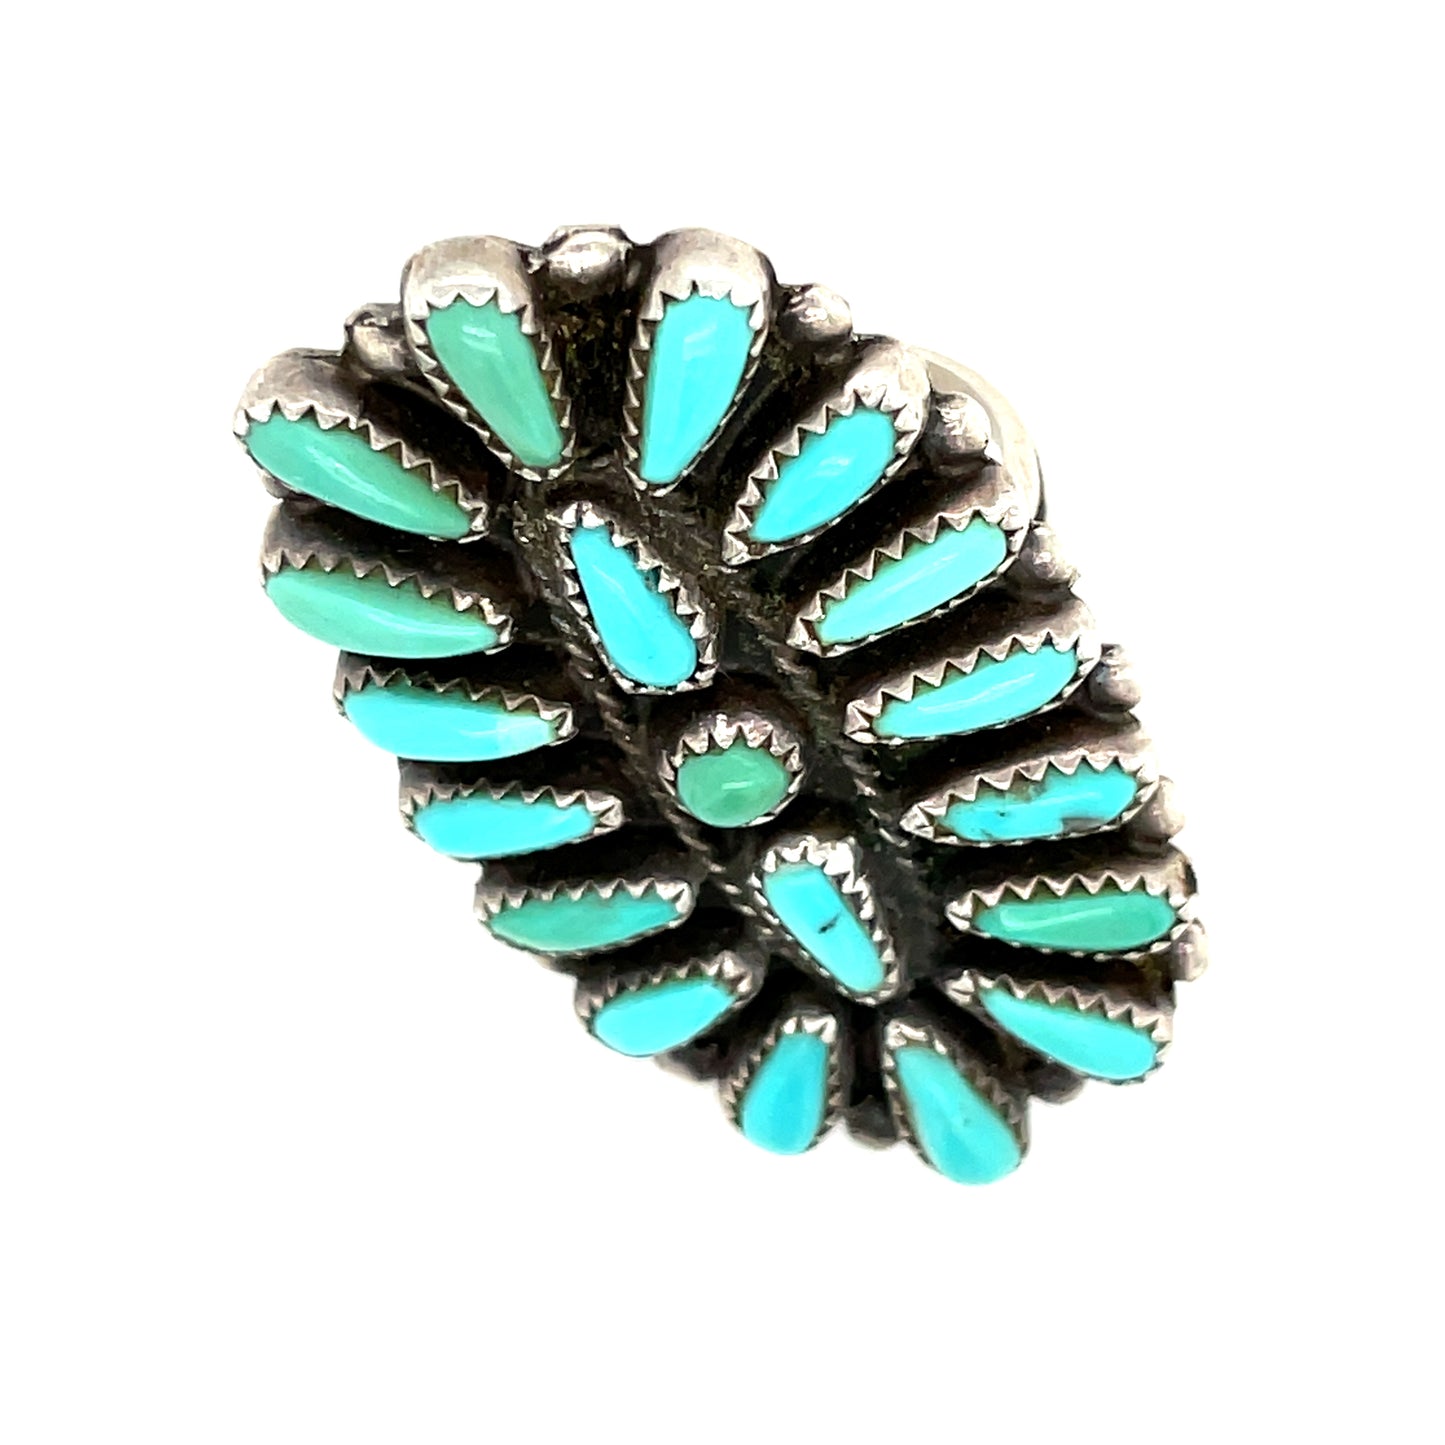 Vintage Navajo Southwestern Sterling Silver and Turquoise Cluster Ring Size 9.5